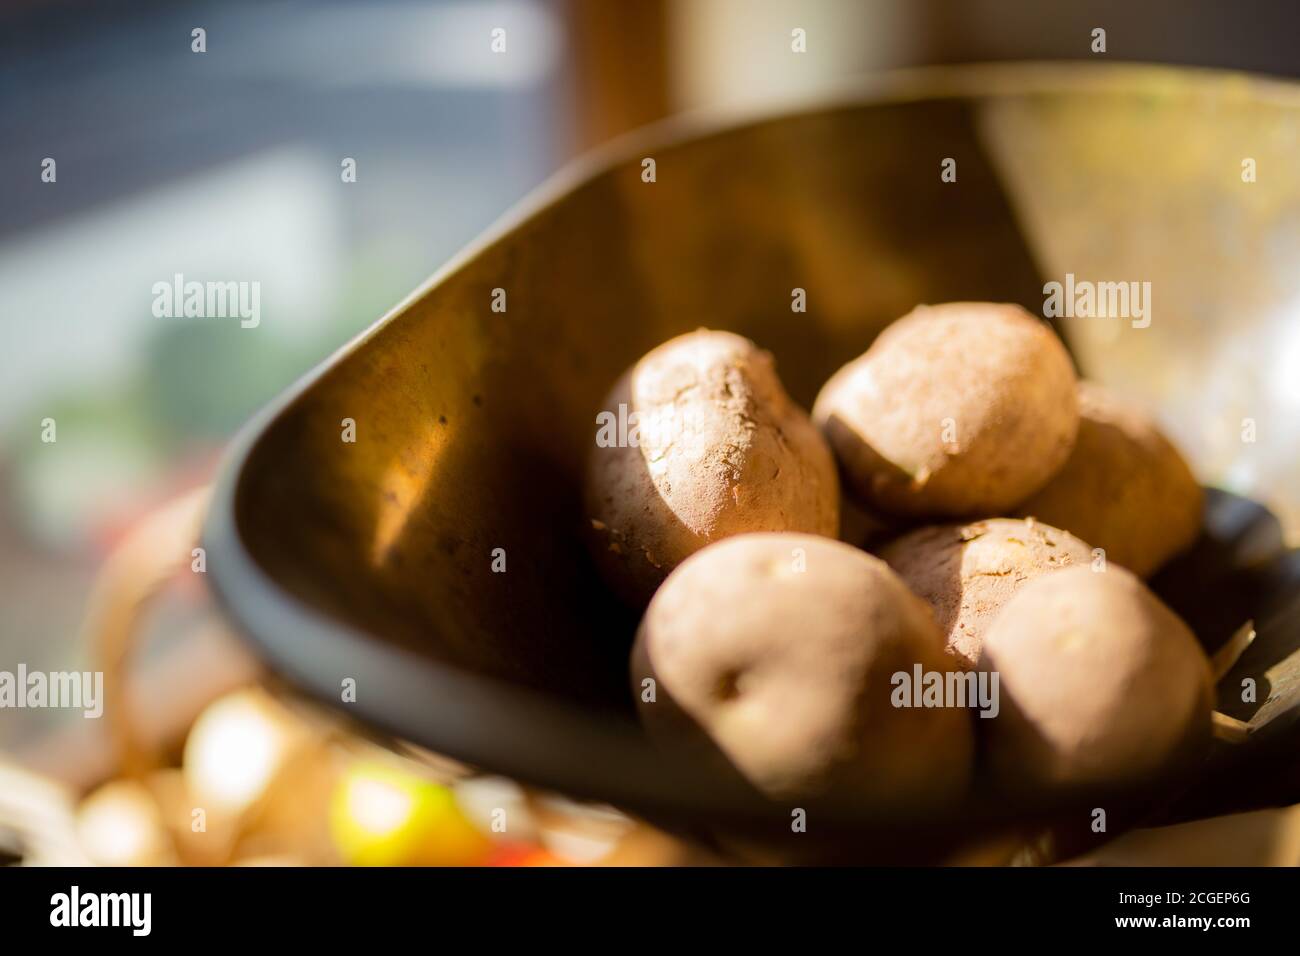 Potatoes on a scale in an old fashioned vegetable shop in UK Stock Photo